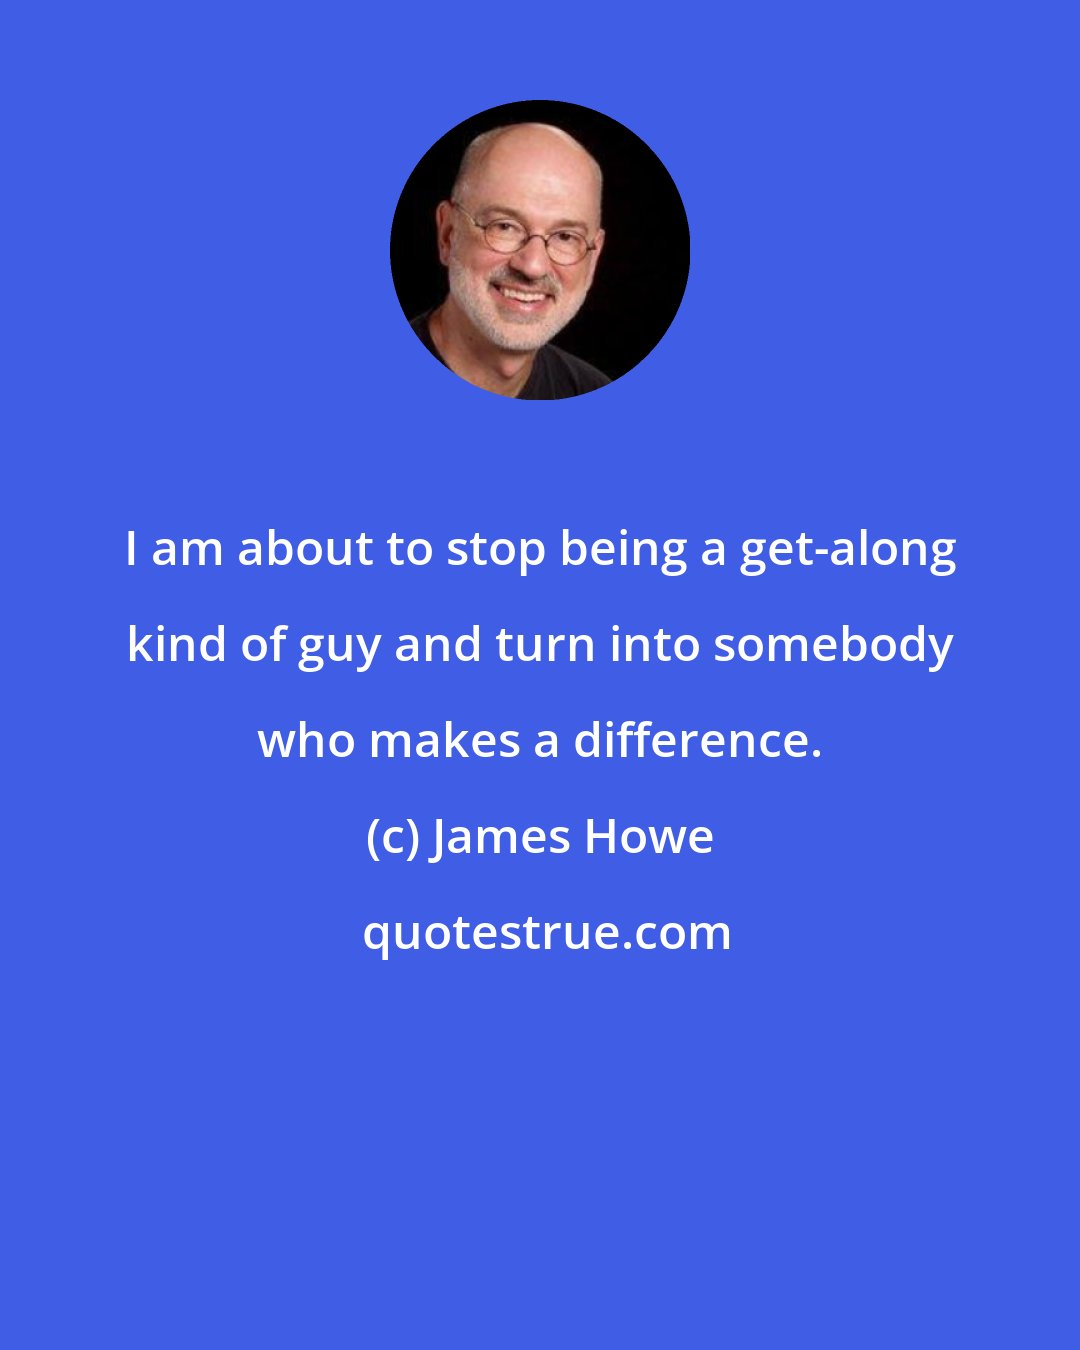 James Howe: I am about to stop being a get-along kind of guy and turn into somebody who makes a difference.